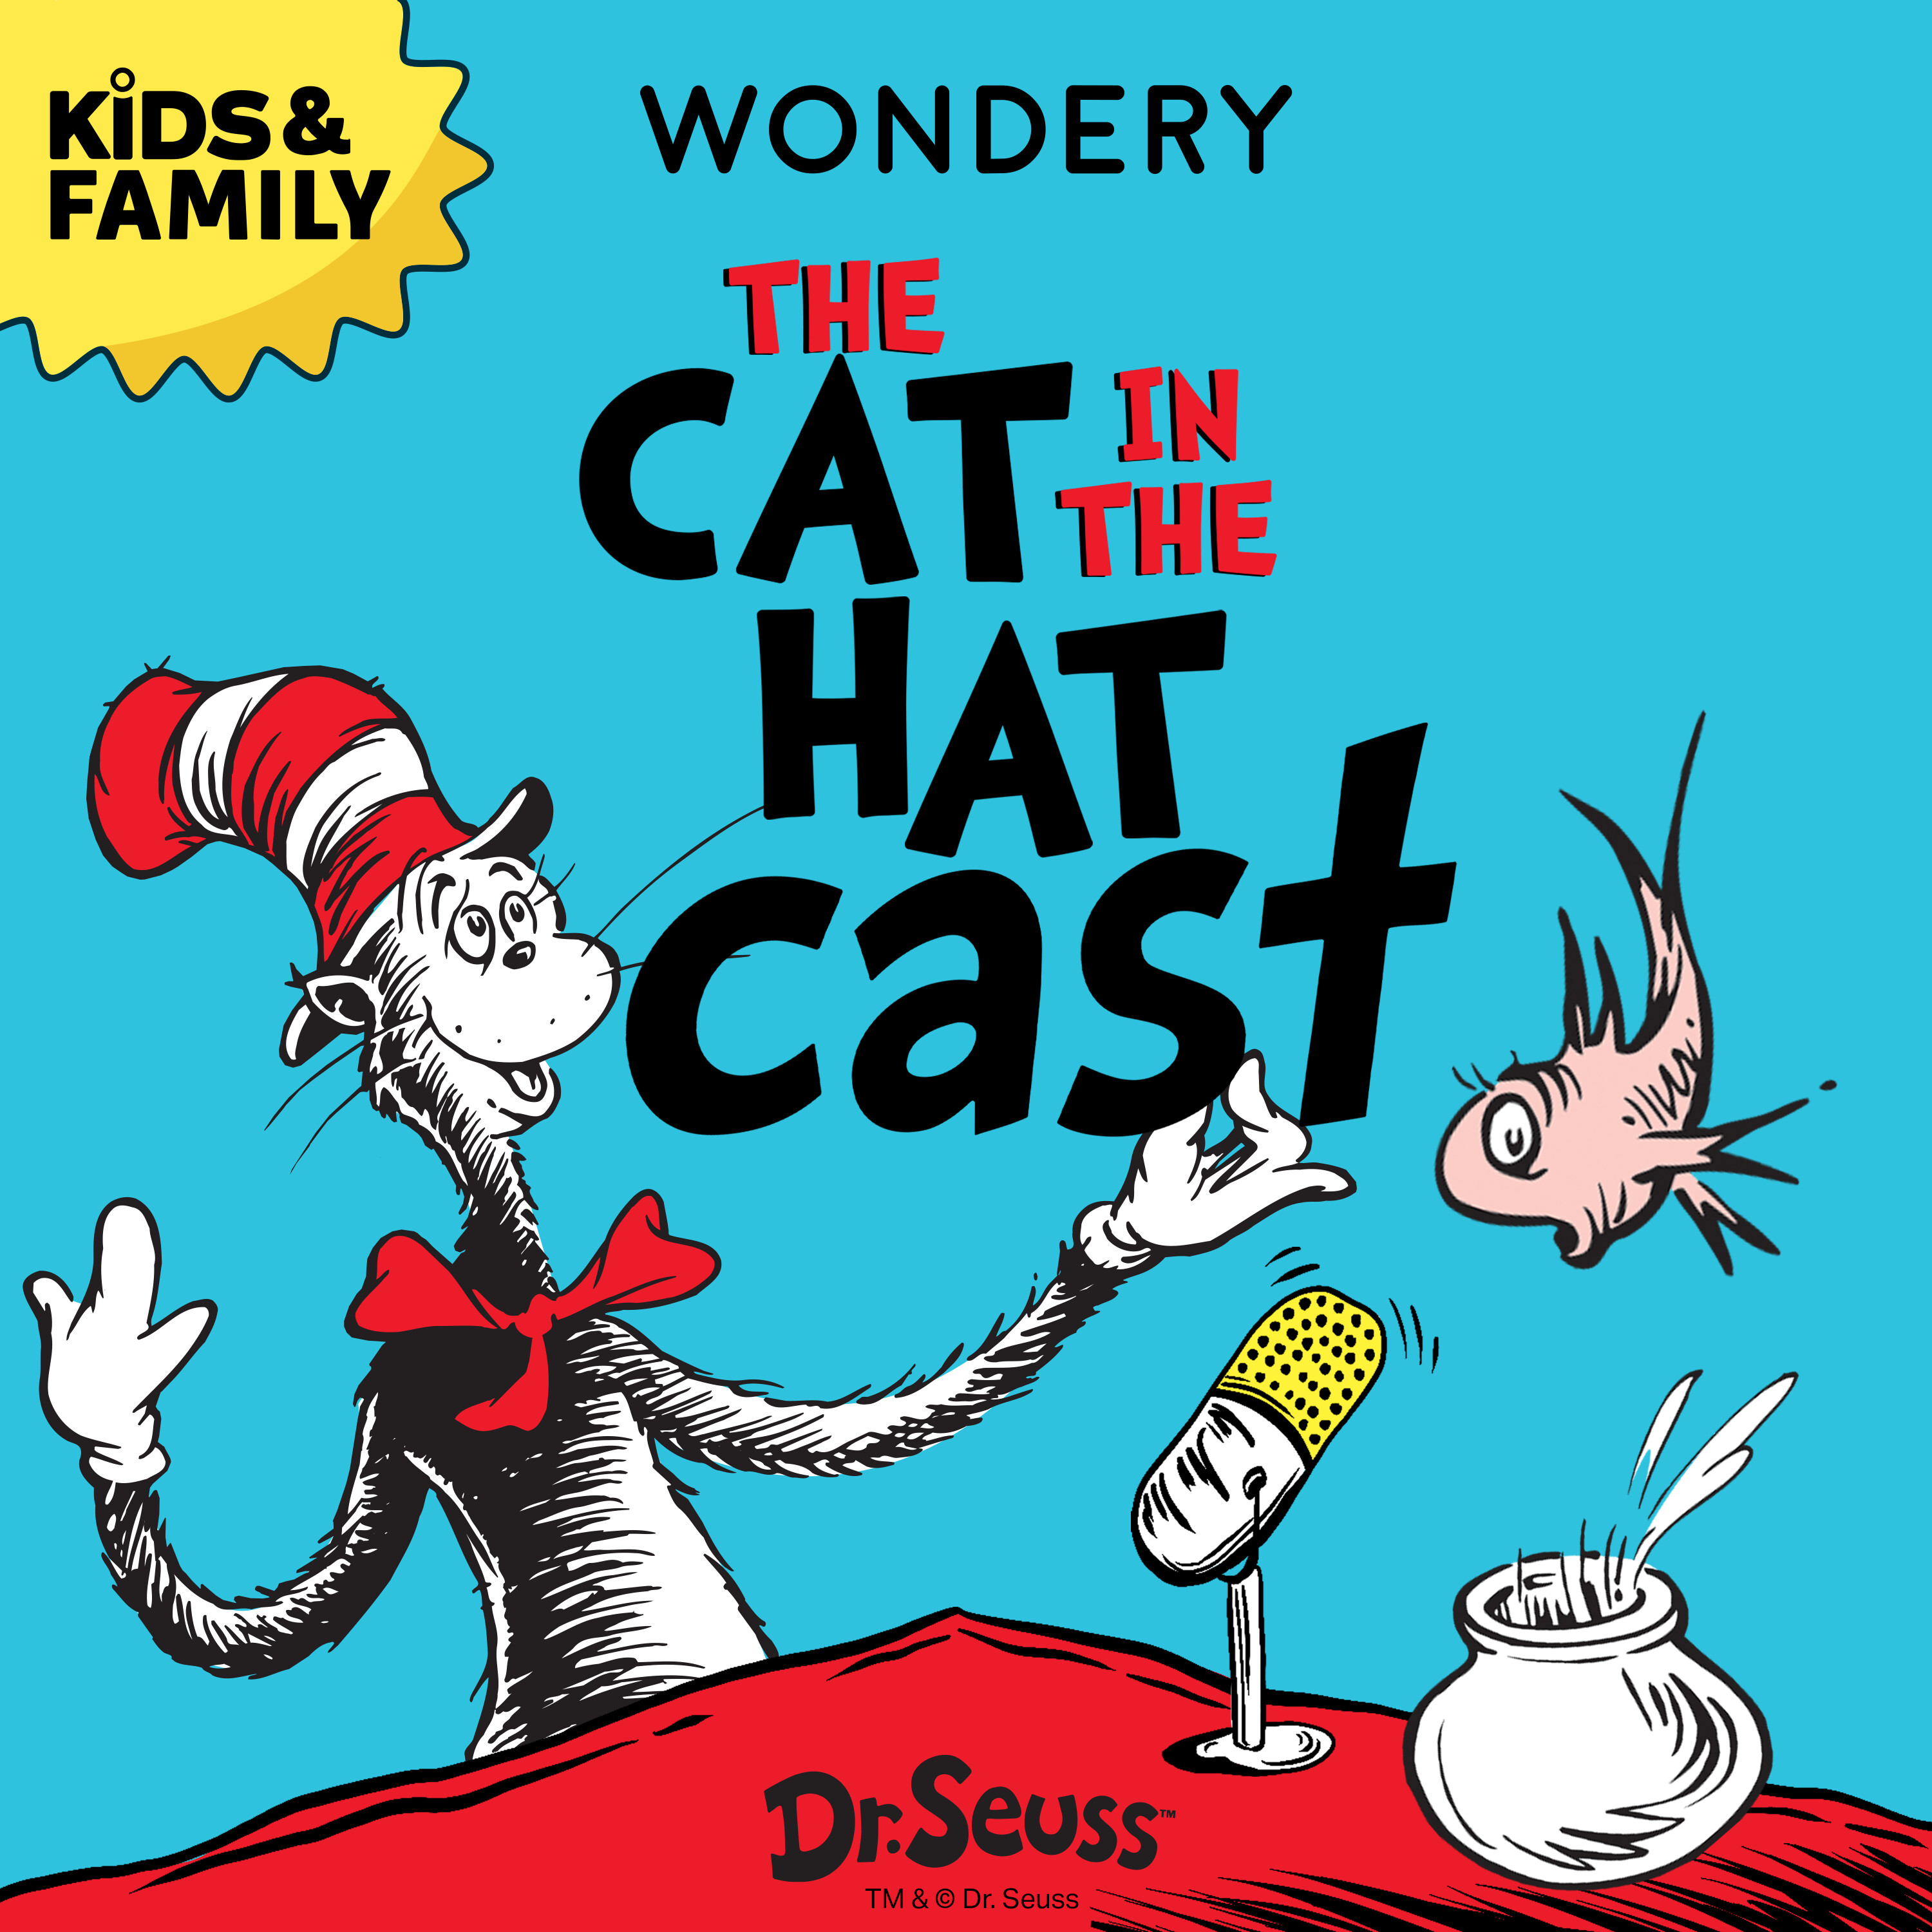 The Cat In The Hat Cast podcast show image